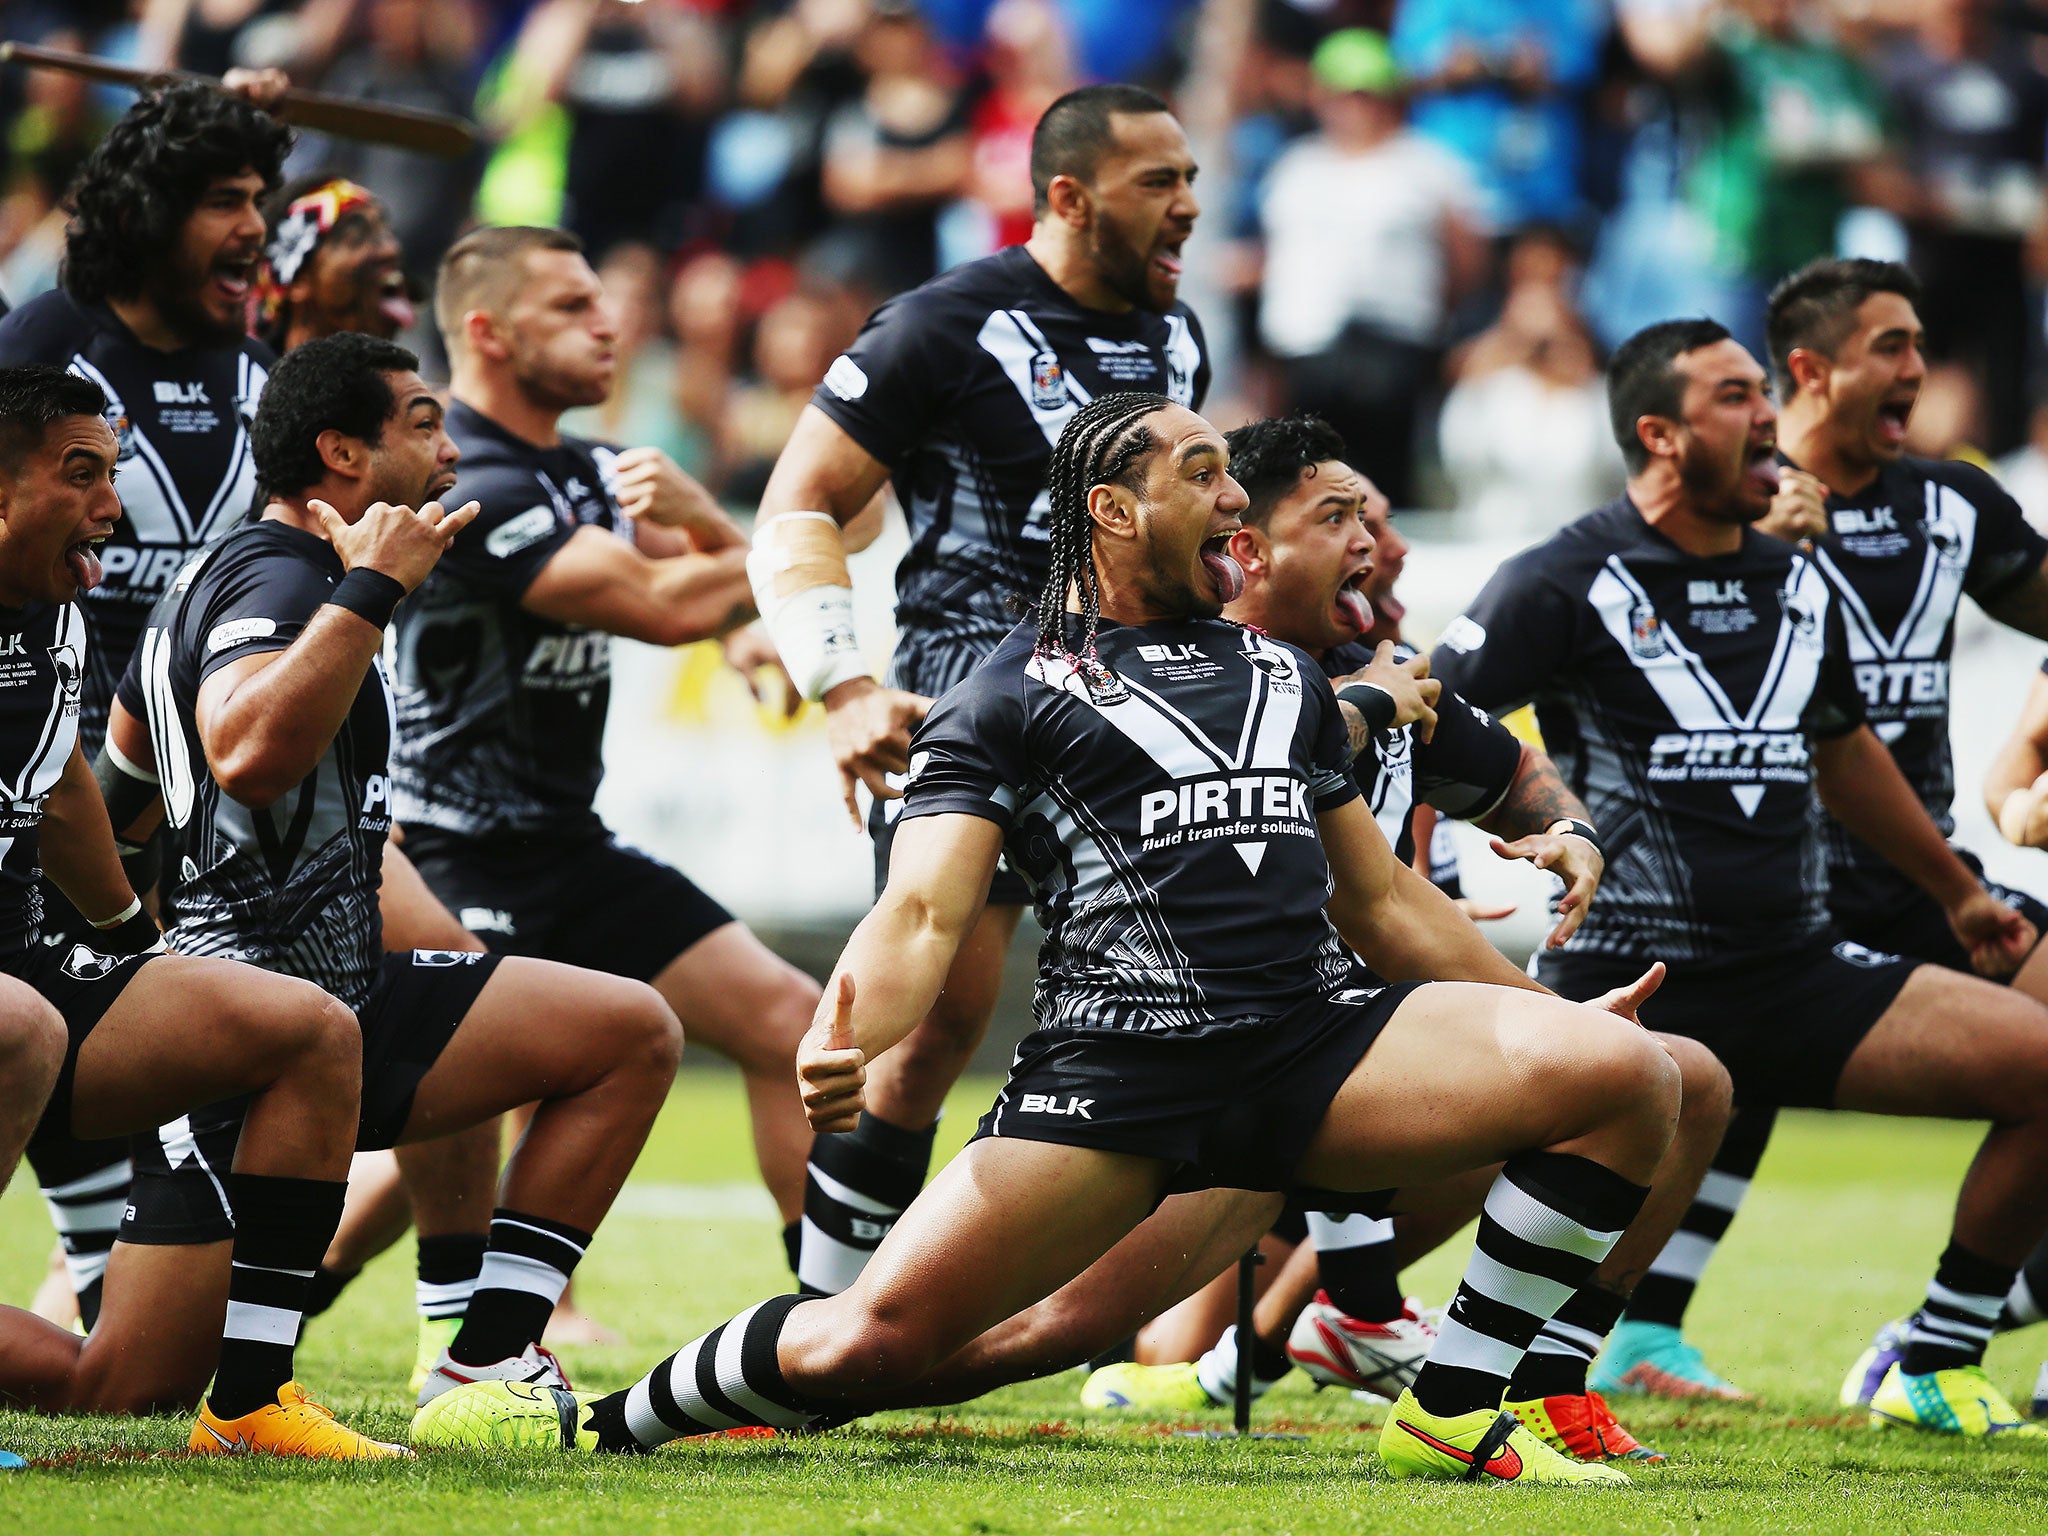 New Zealand's rugby league side perform the Haka ahead of their Four Nations clash with Samoa